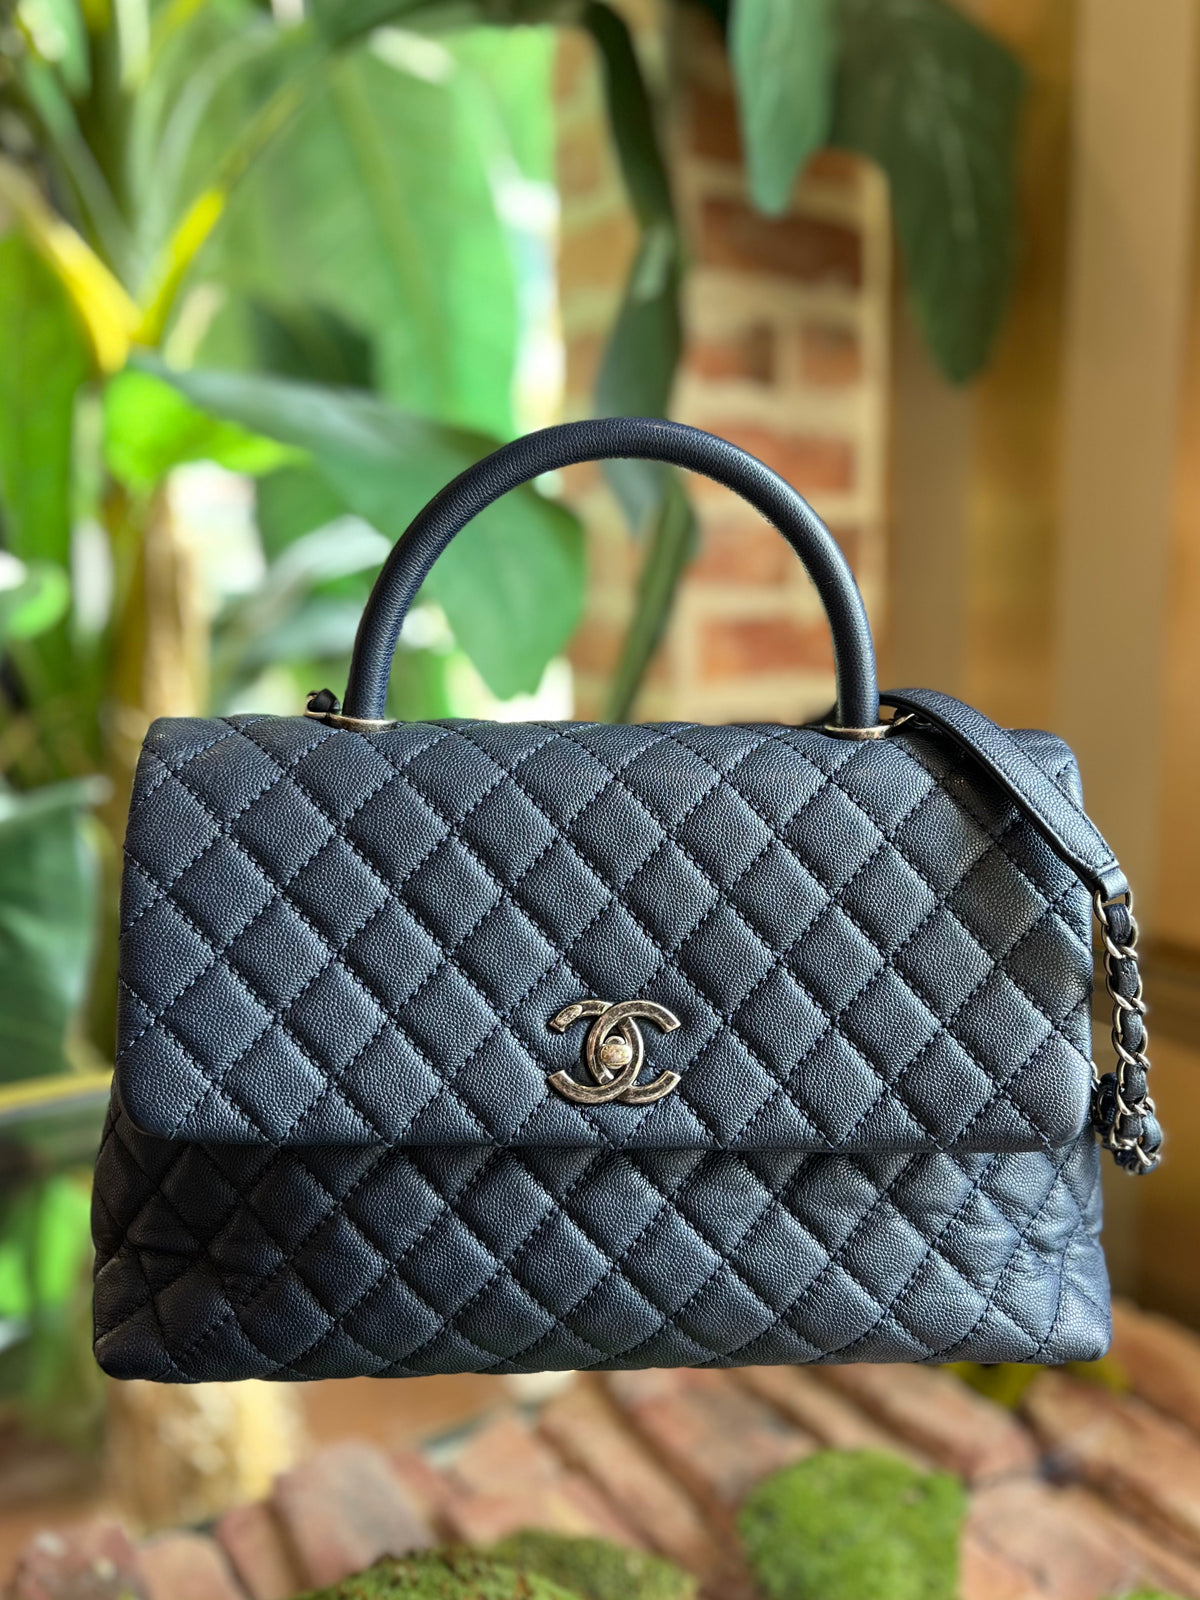 CHANEL Navy Blue Caviar Quilted Leather Large Coco Top Handle Flap Bag